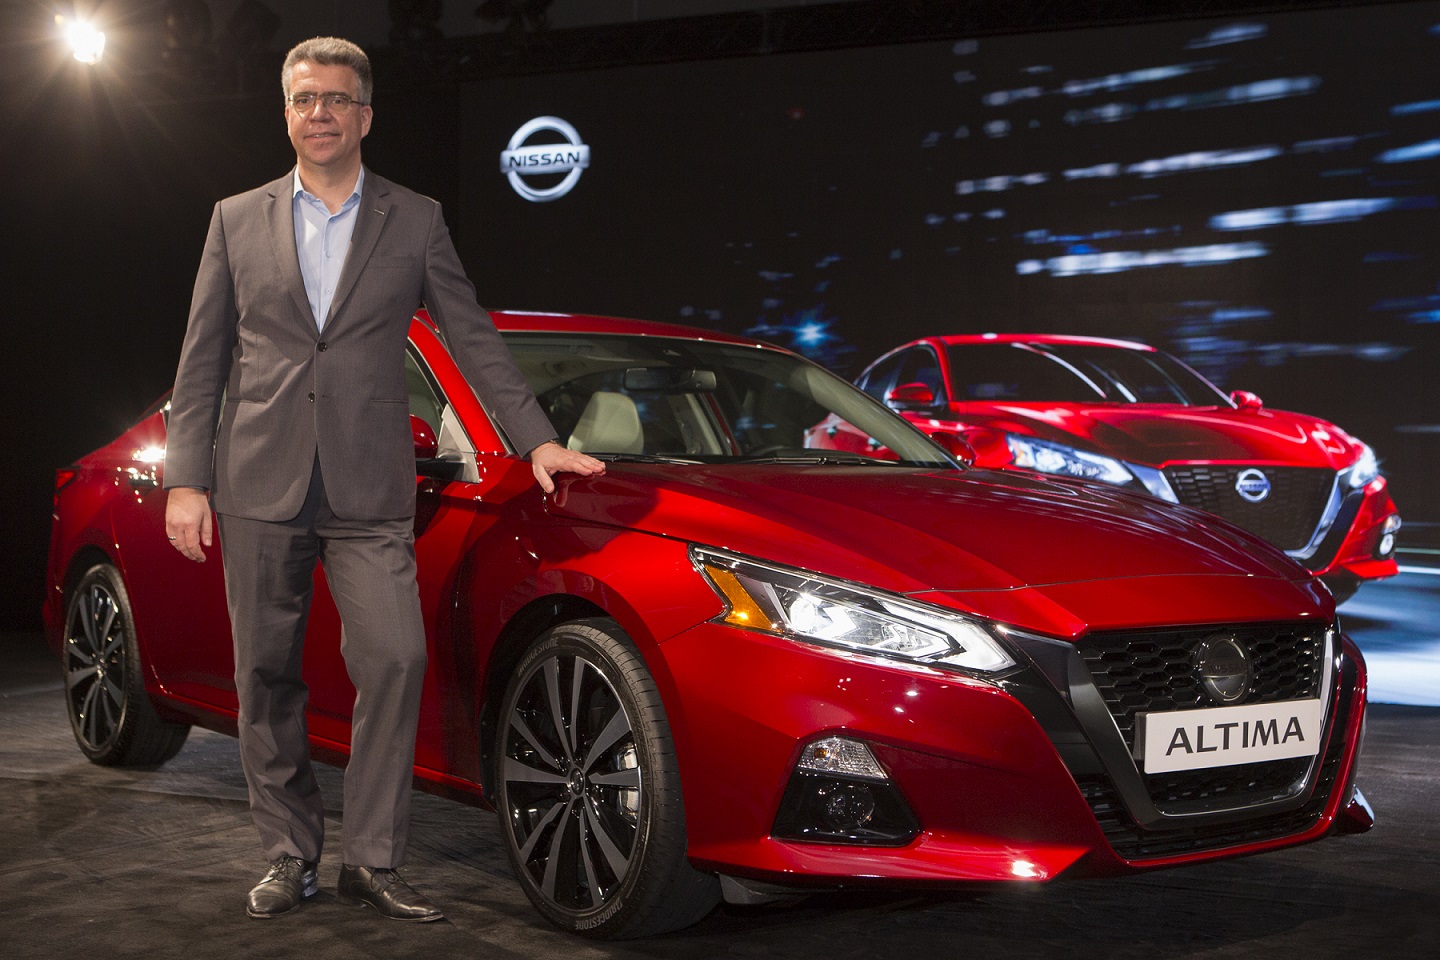 All-New 2019 Nissan Altima Makes its Middle East Debut